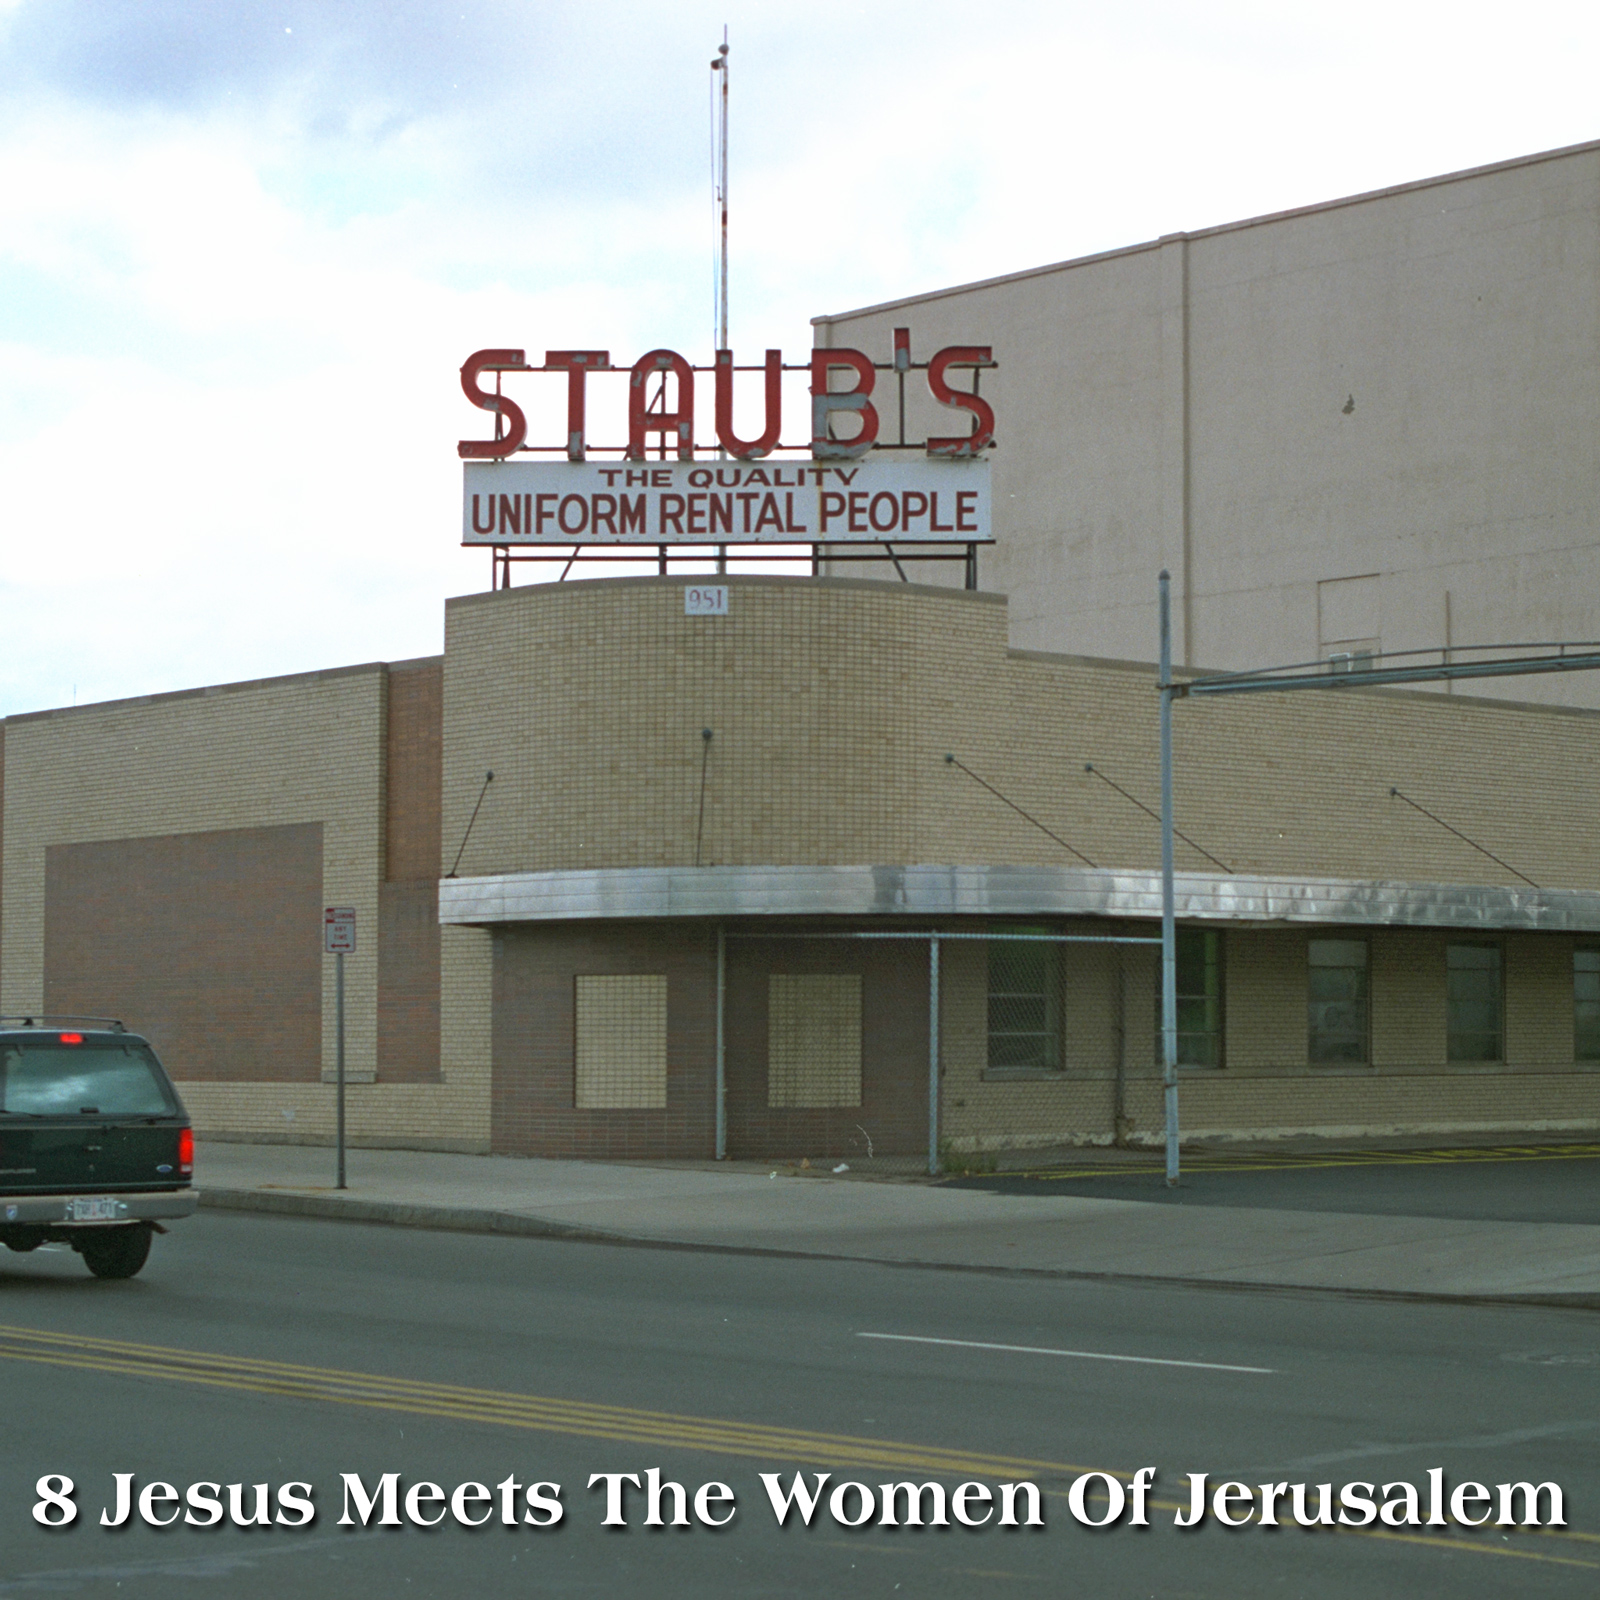 Layout for "Passion Play 1998" locations, East Main Street Rochester, New York